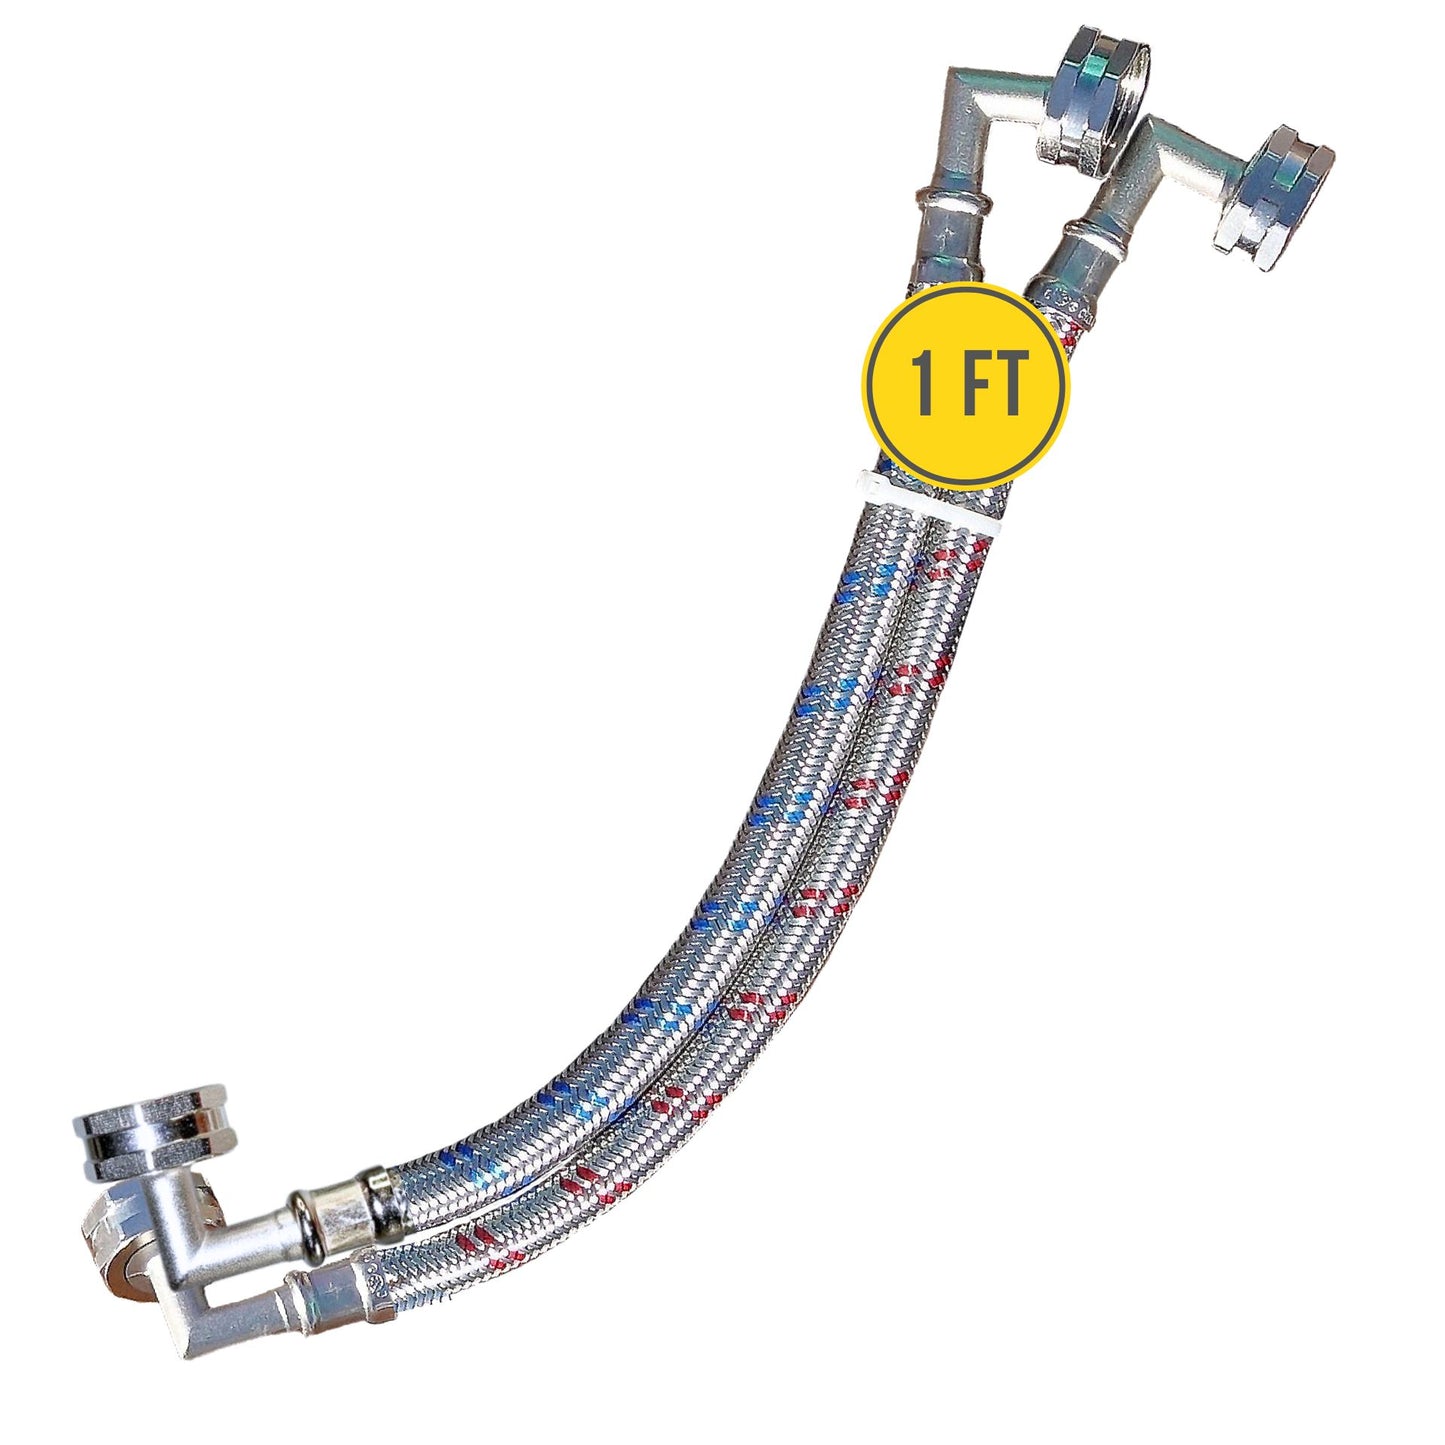 S-Configuration -  Double-Sided 90 Degree Elbow Connections - Stainless Steel Washing Machine Hose